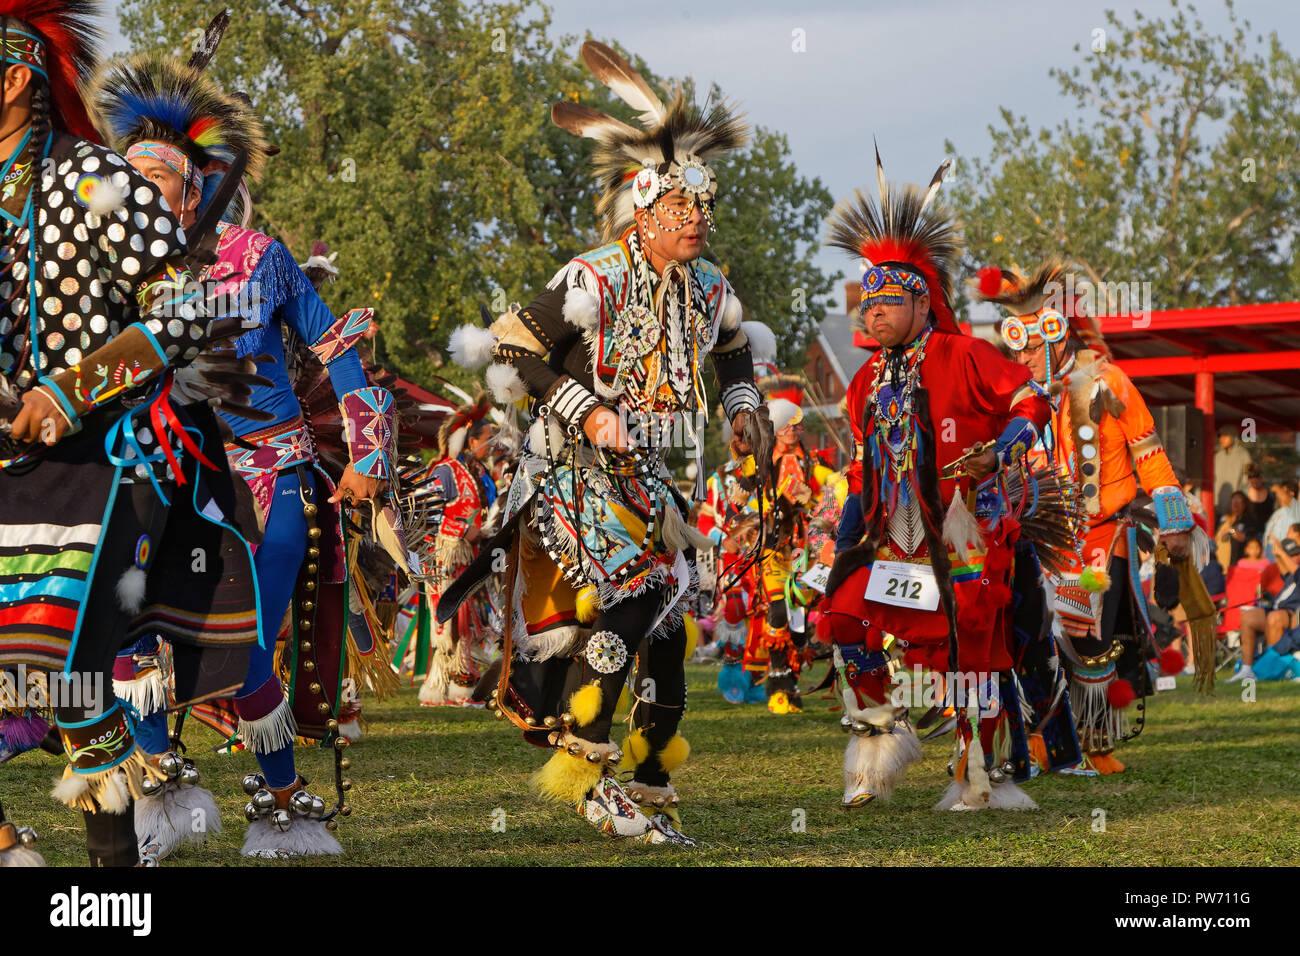 BISMARK, NORTH DAKOTA, September 8, 2018 : Grand Entry of the 49th annual United Tribes Pow Wow, one large outdoor event that gathers more than 900 da Stock Photo